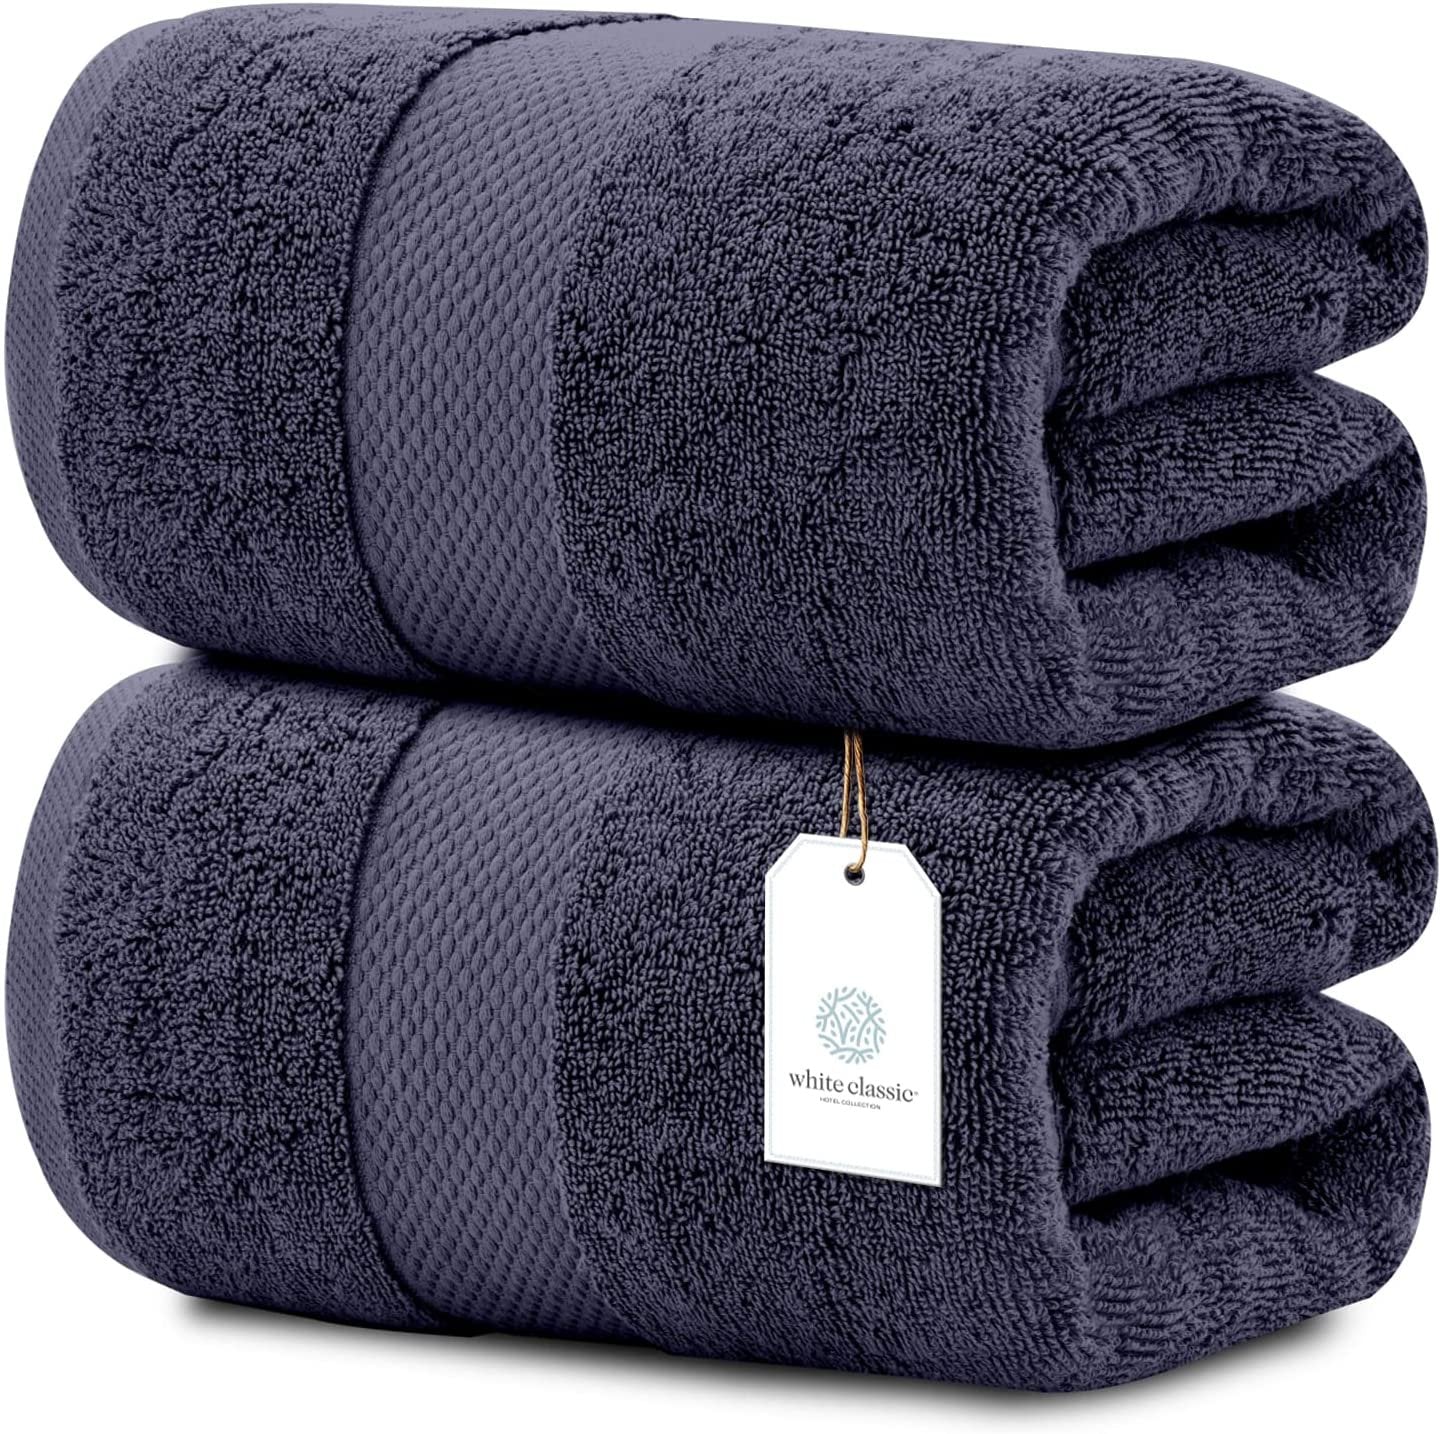 Extra Large Luxury Bath Sheet Towels 35x70 Green | Highly Absorbent Hotel Spa Collection | Free Ship